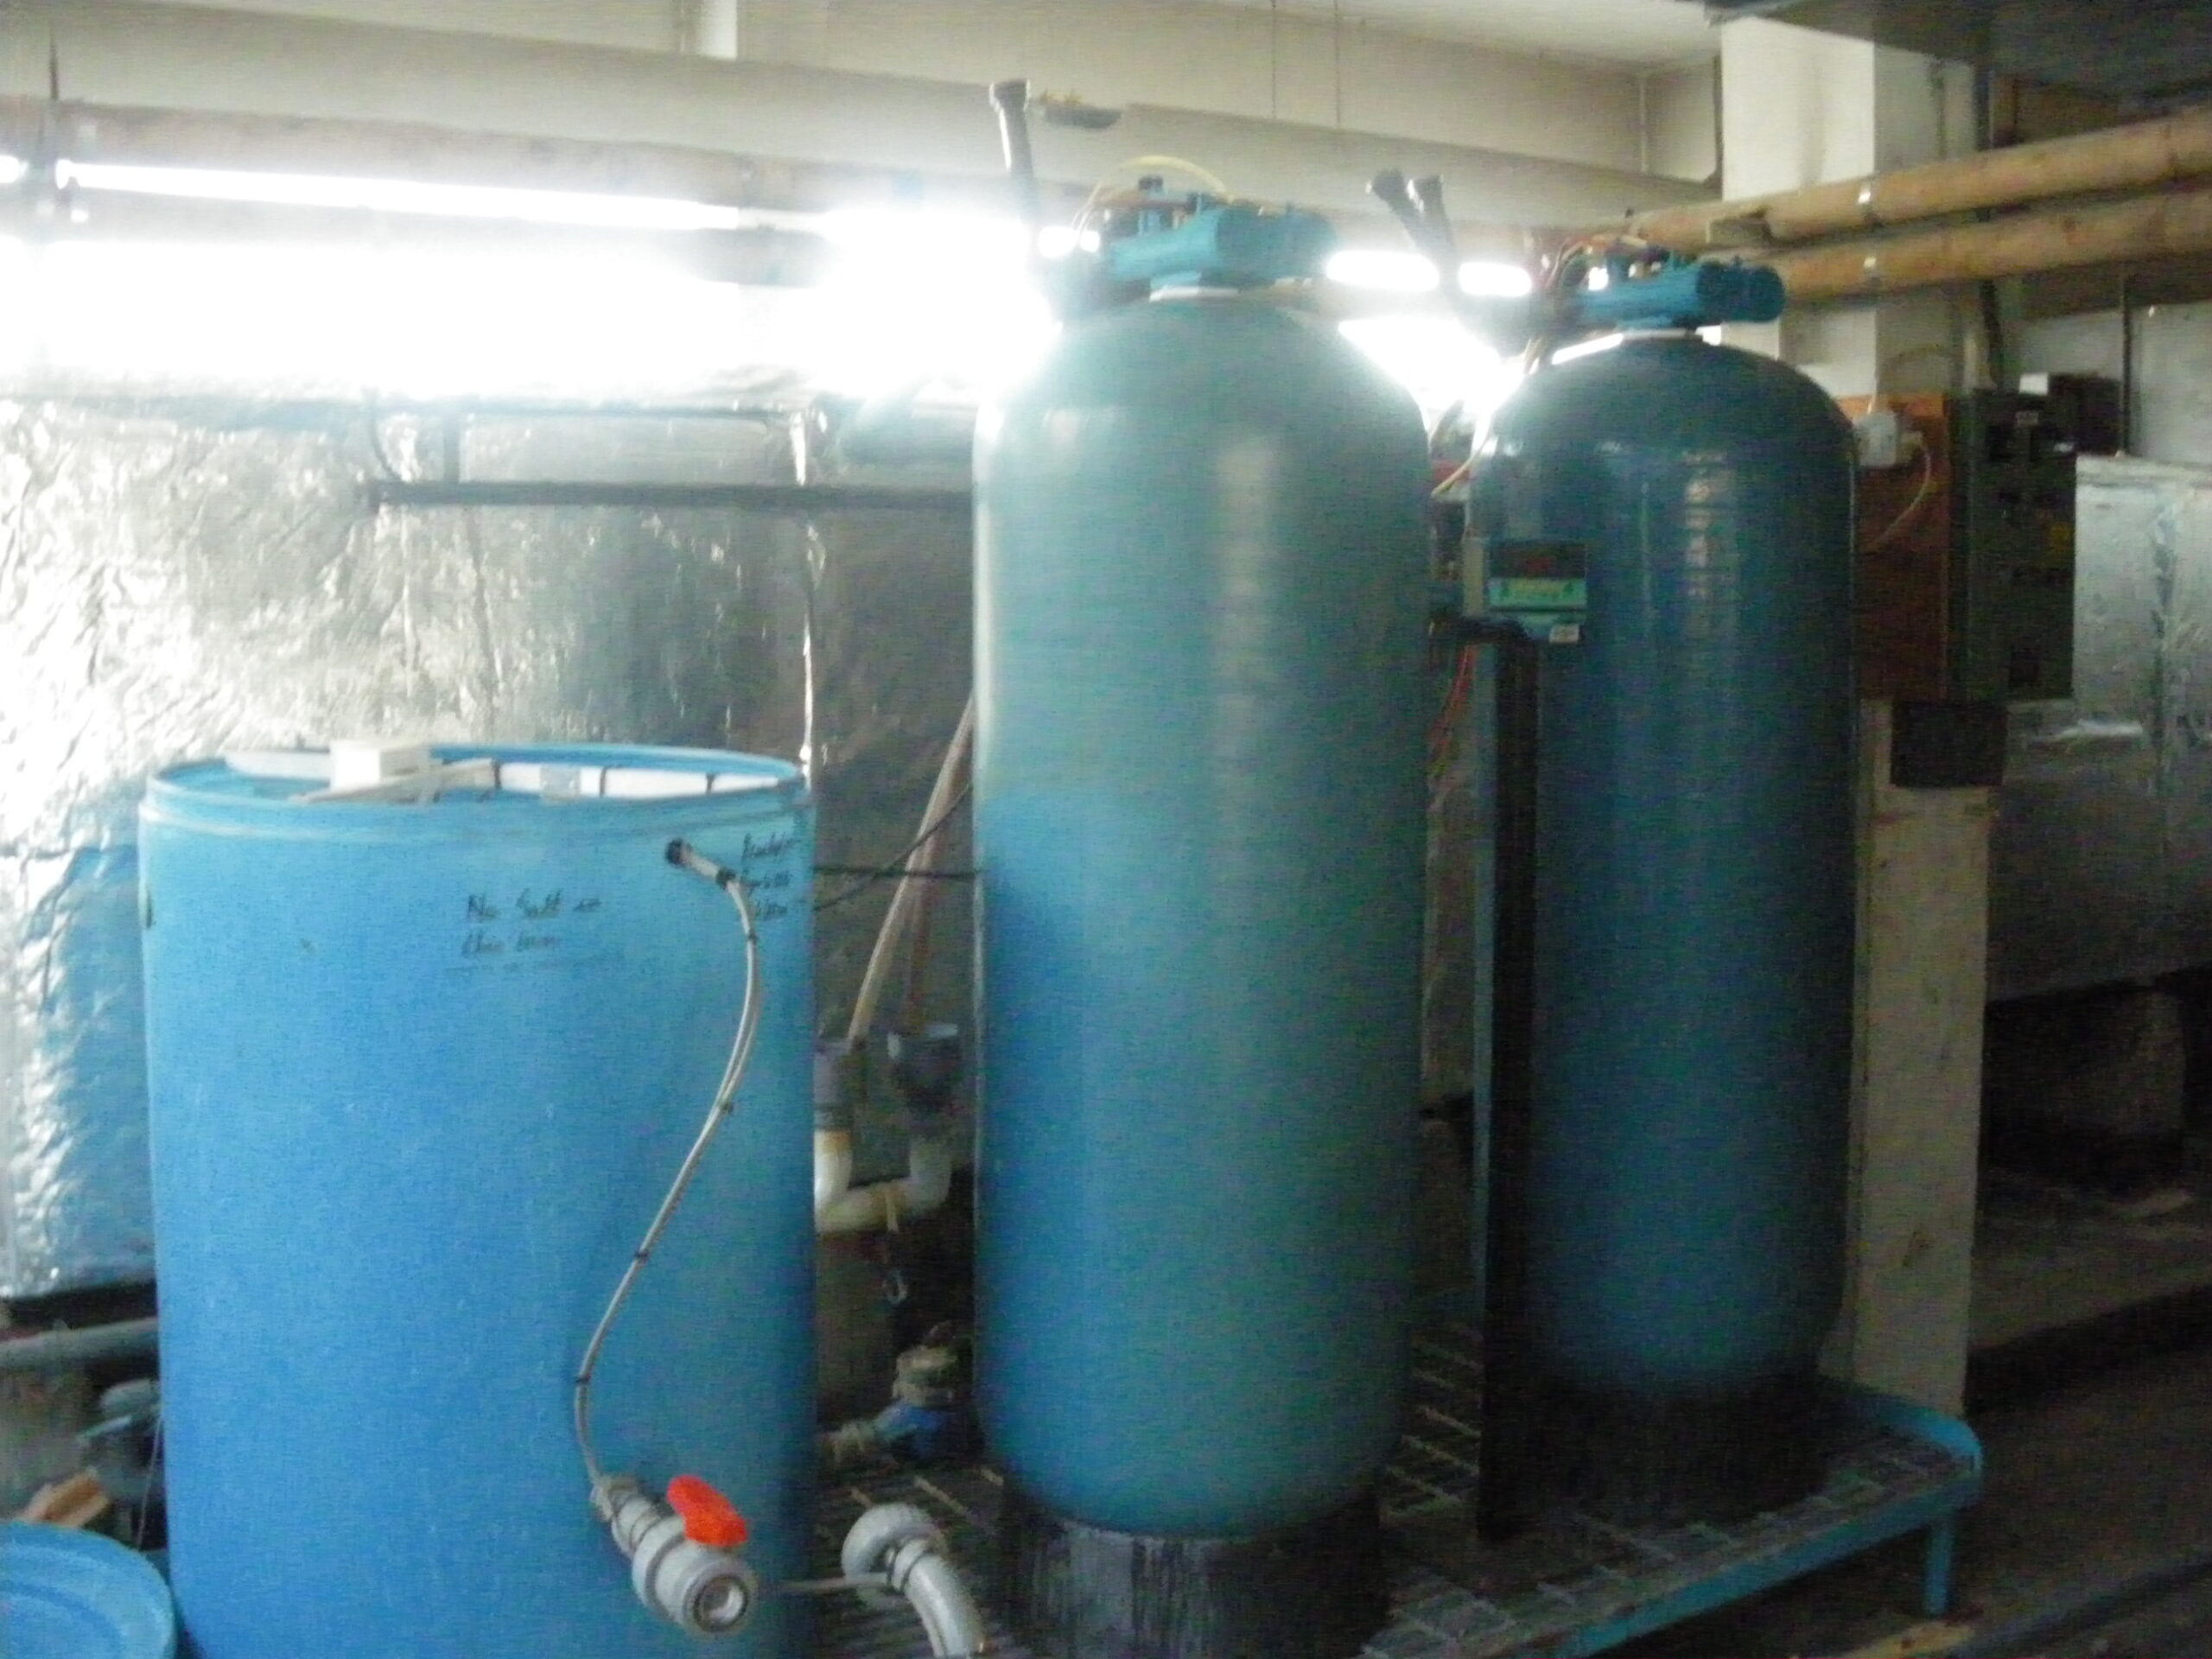 Cooling tower water softening plant, 13 Sep 2011